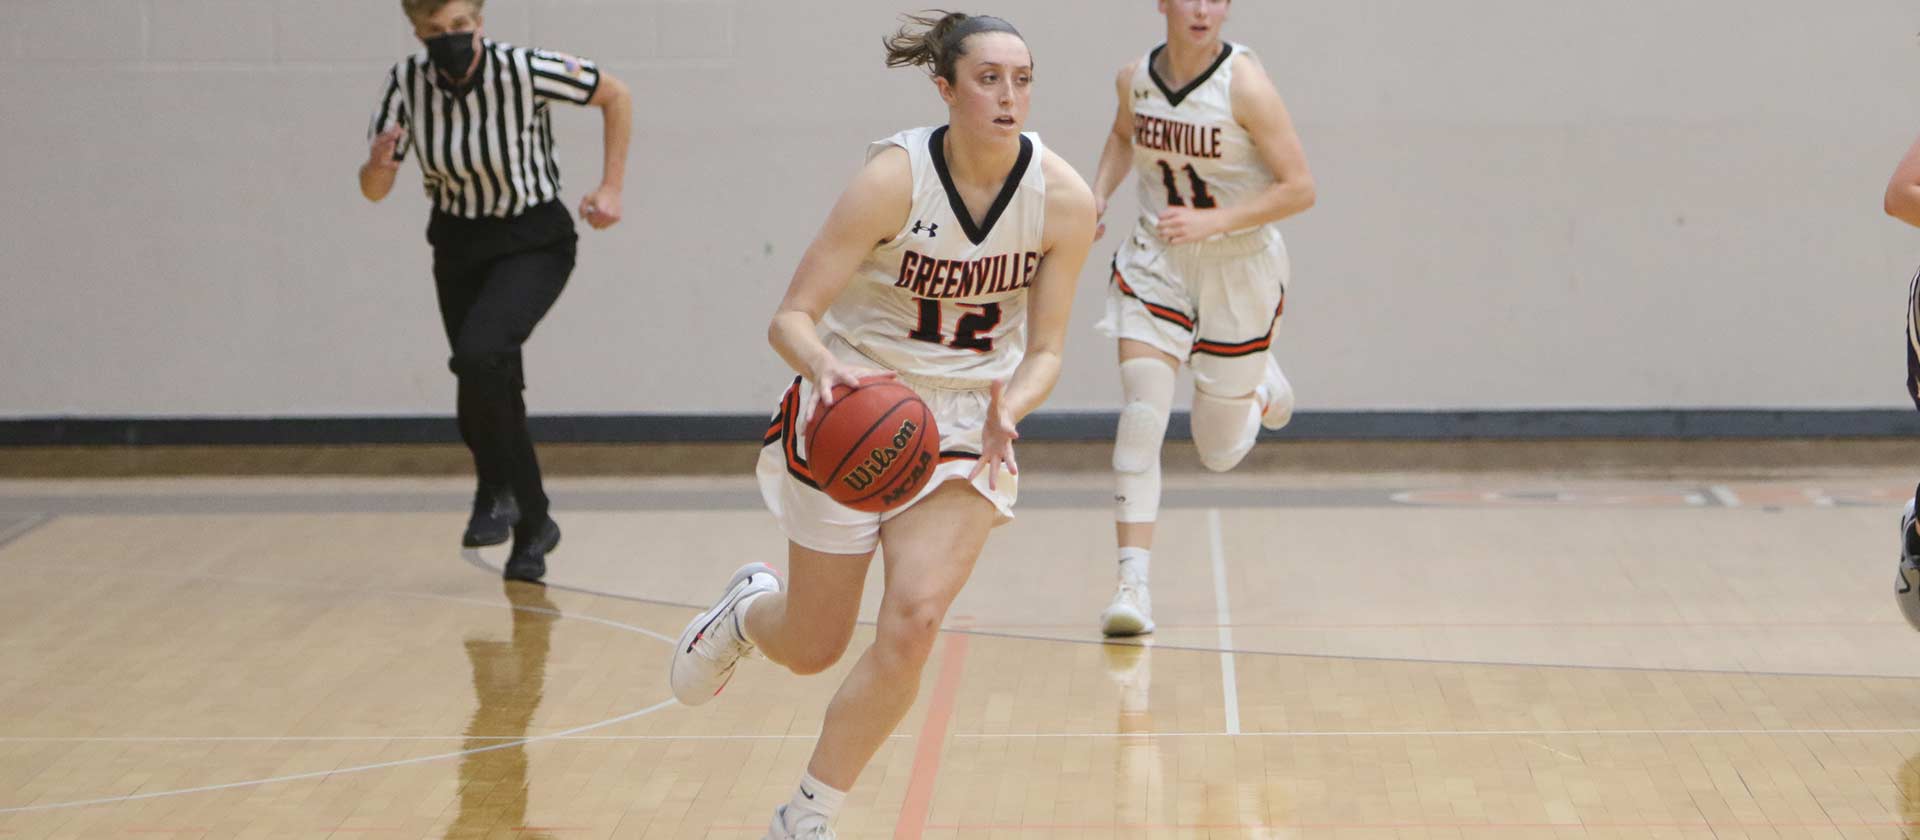 Women's basketball fights back to take 60-57 win over Brevard on Friday